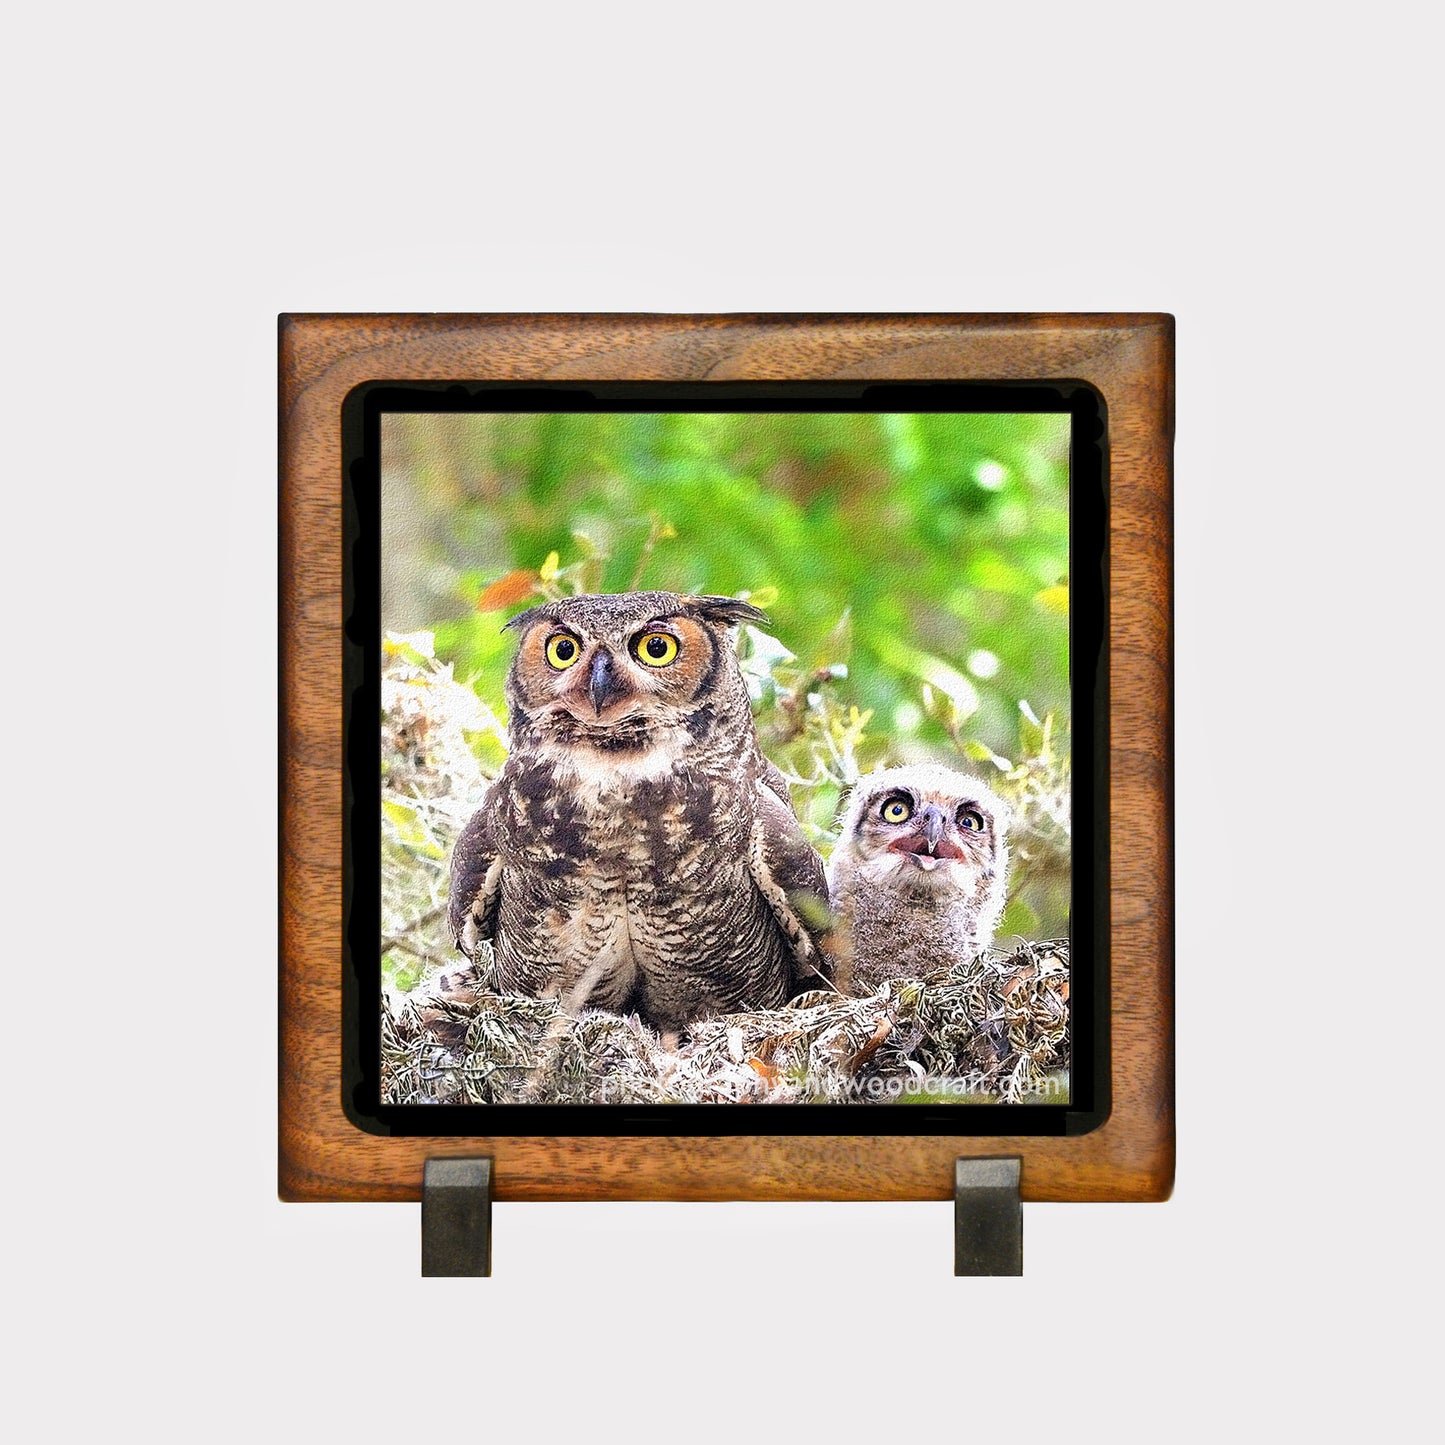 5" x 5" Horned owls. Canvas Print in Solid Wood Floating Frame